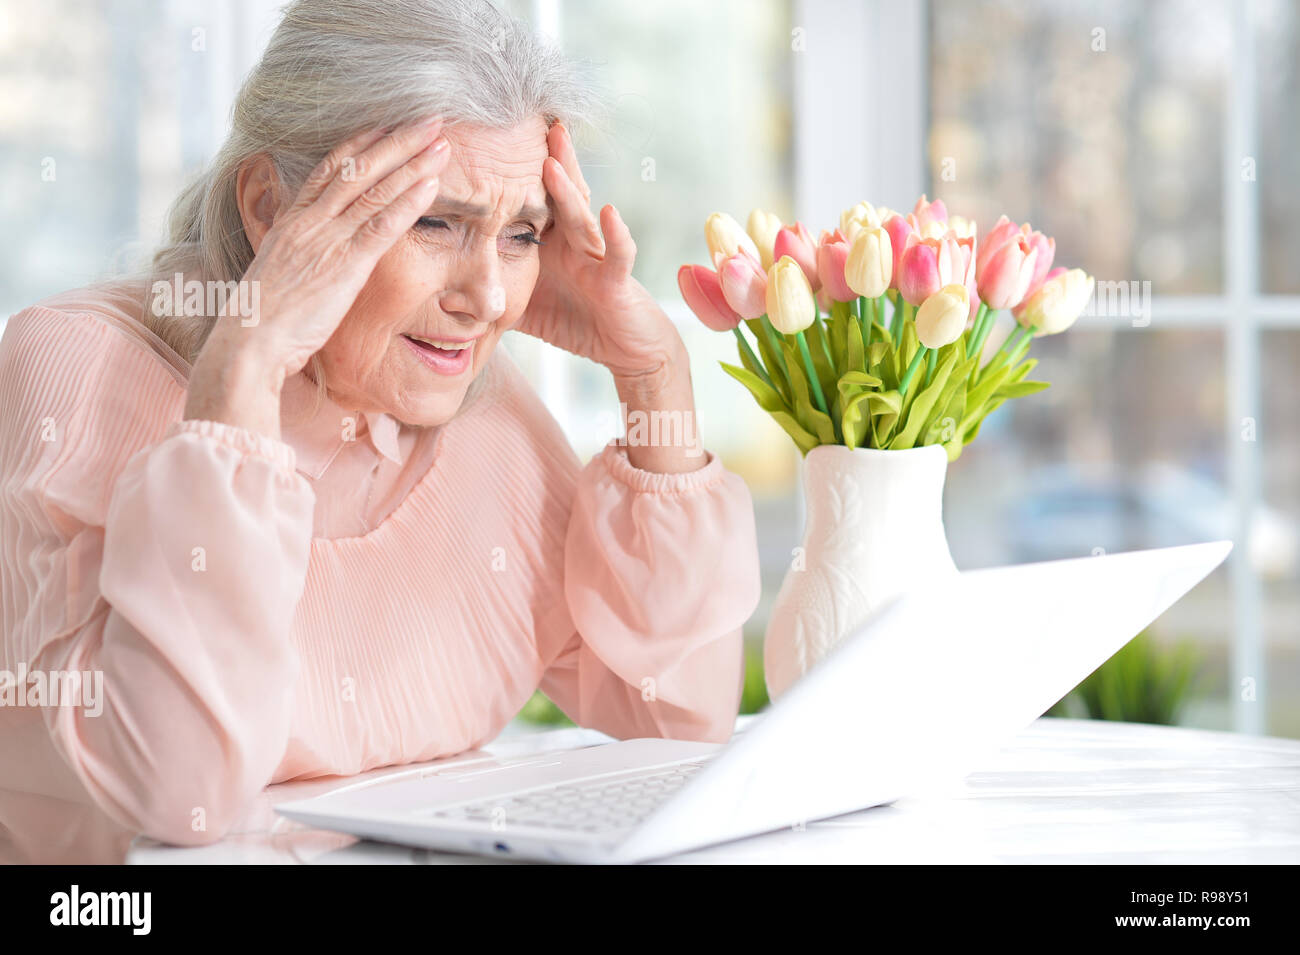 Close up portrait of emotional senior woman with laptop Stock Photo